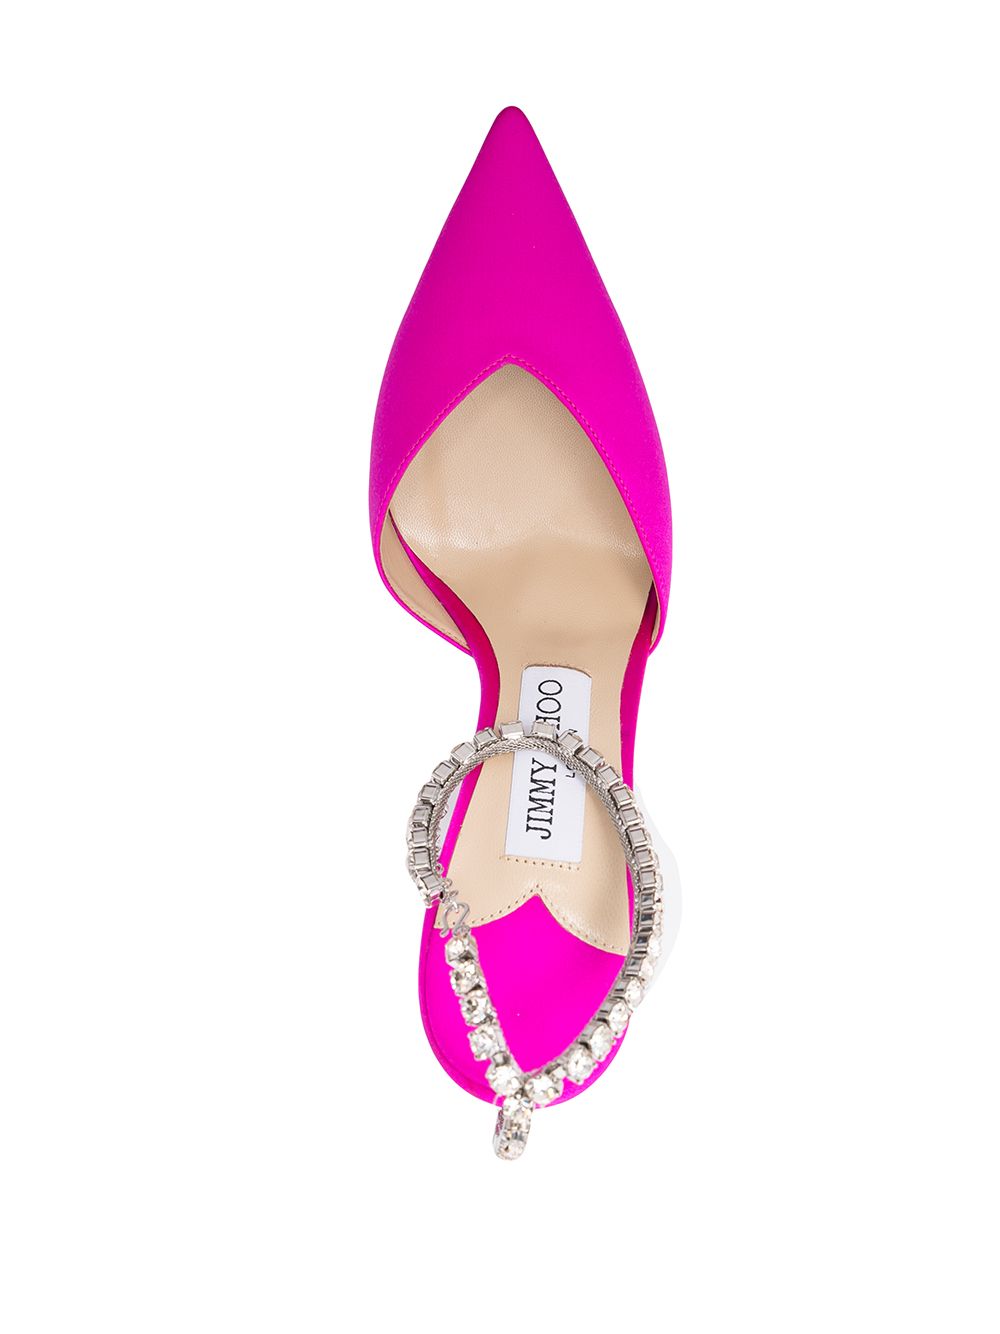 Fuchsia Pink Satin Pumps - Crystal Embellished Pointed Toe High Heel Shoes for Women